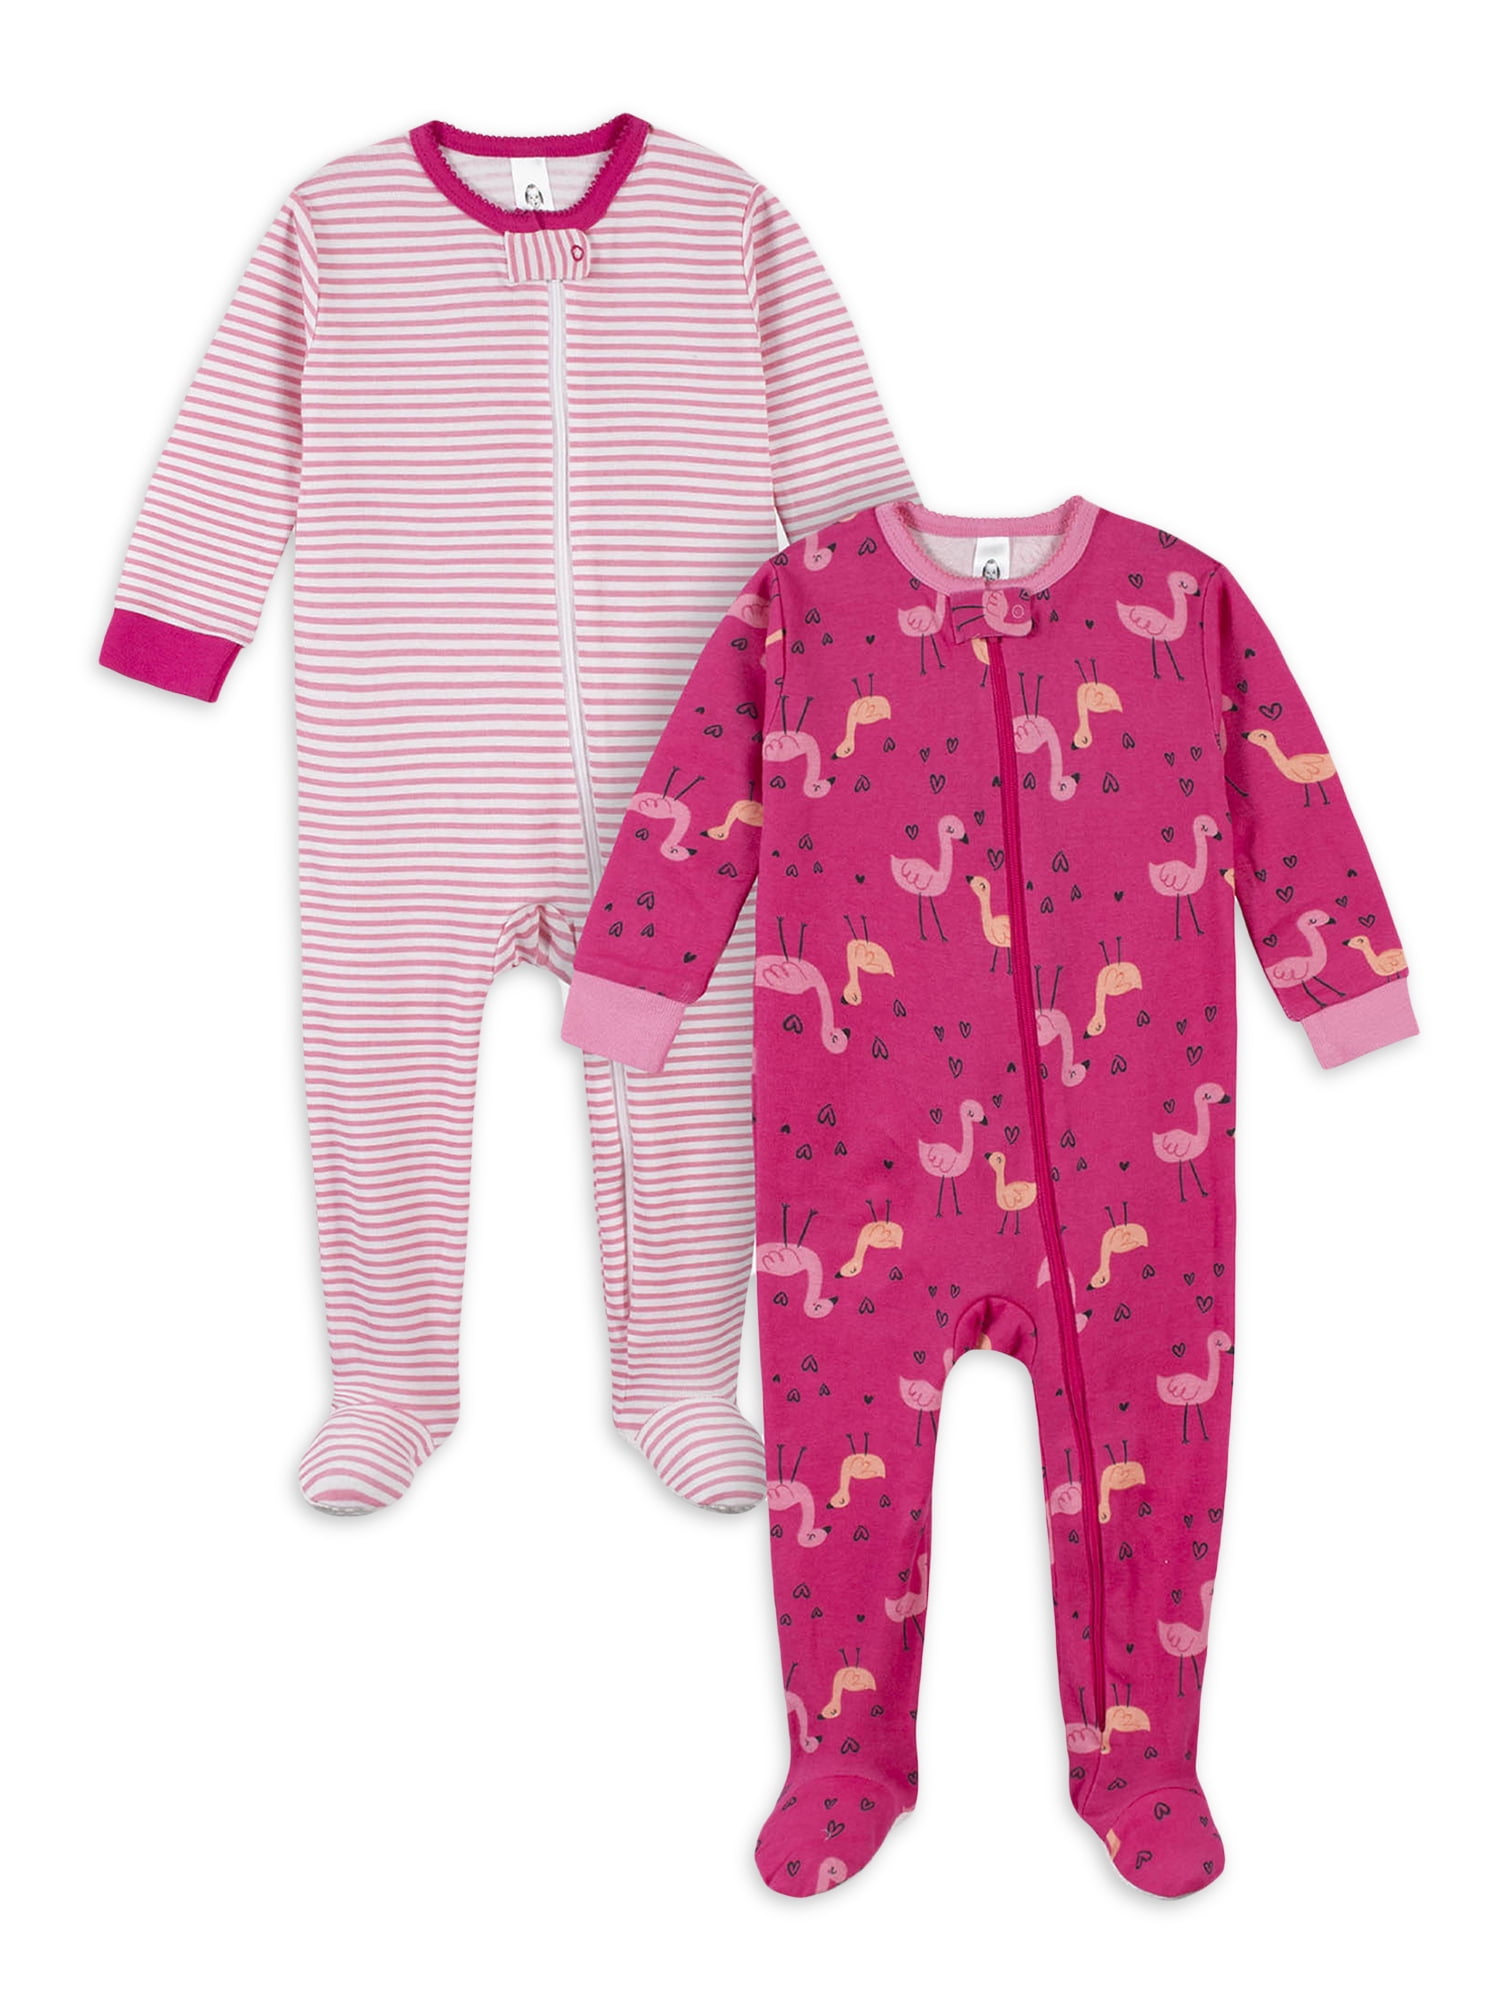 Pack of 3 Simple Joys by Carter's Baby Girl's 3-Pack Snug Fit Footed Cotton Pyjamas 